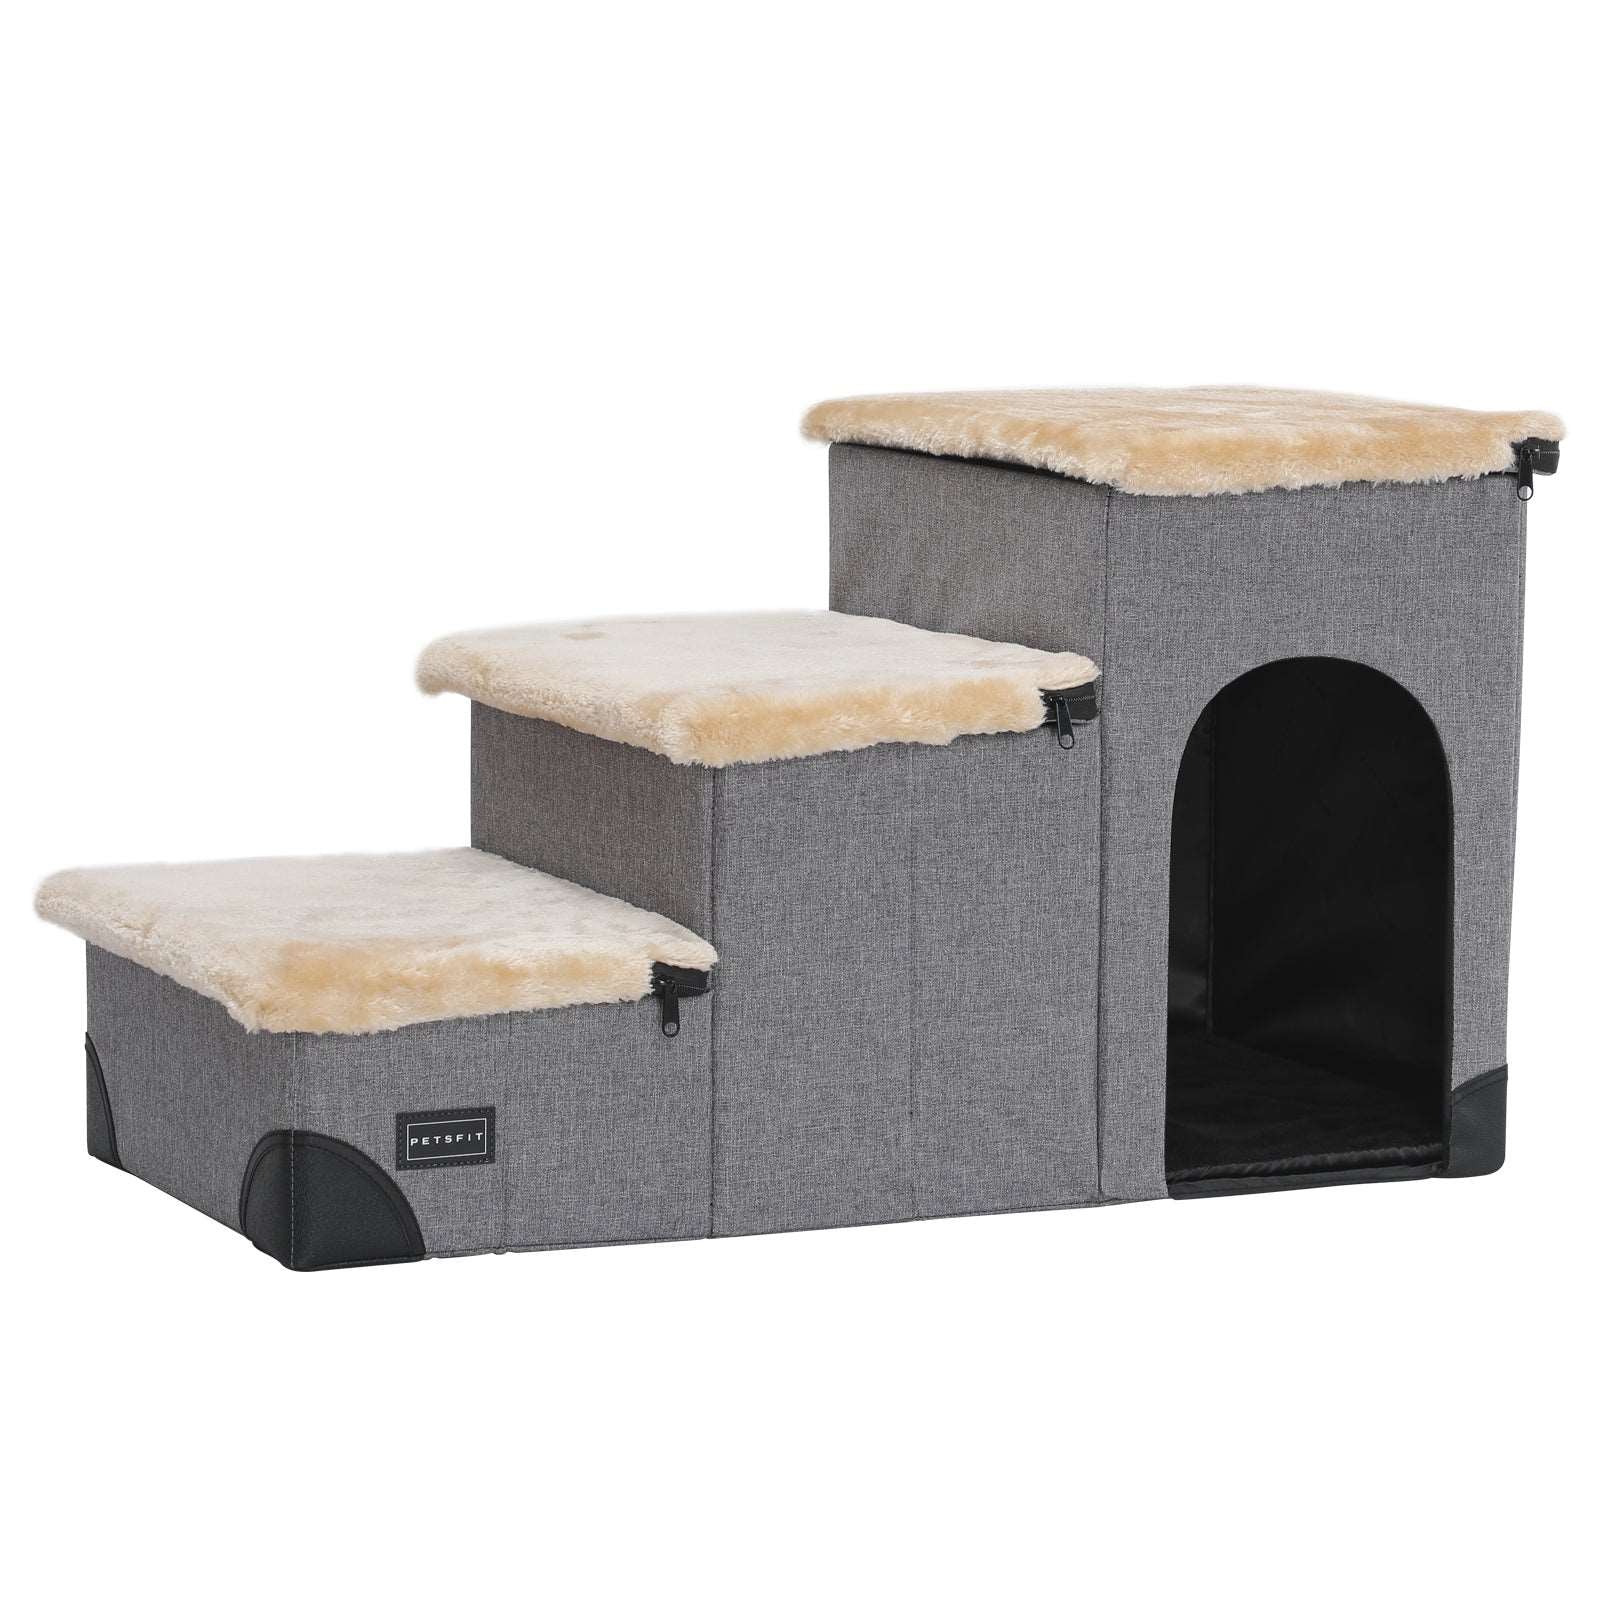 Petsfit-Pet-Steps-3-in-1-Multi-Use-with-Storage-Room-01